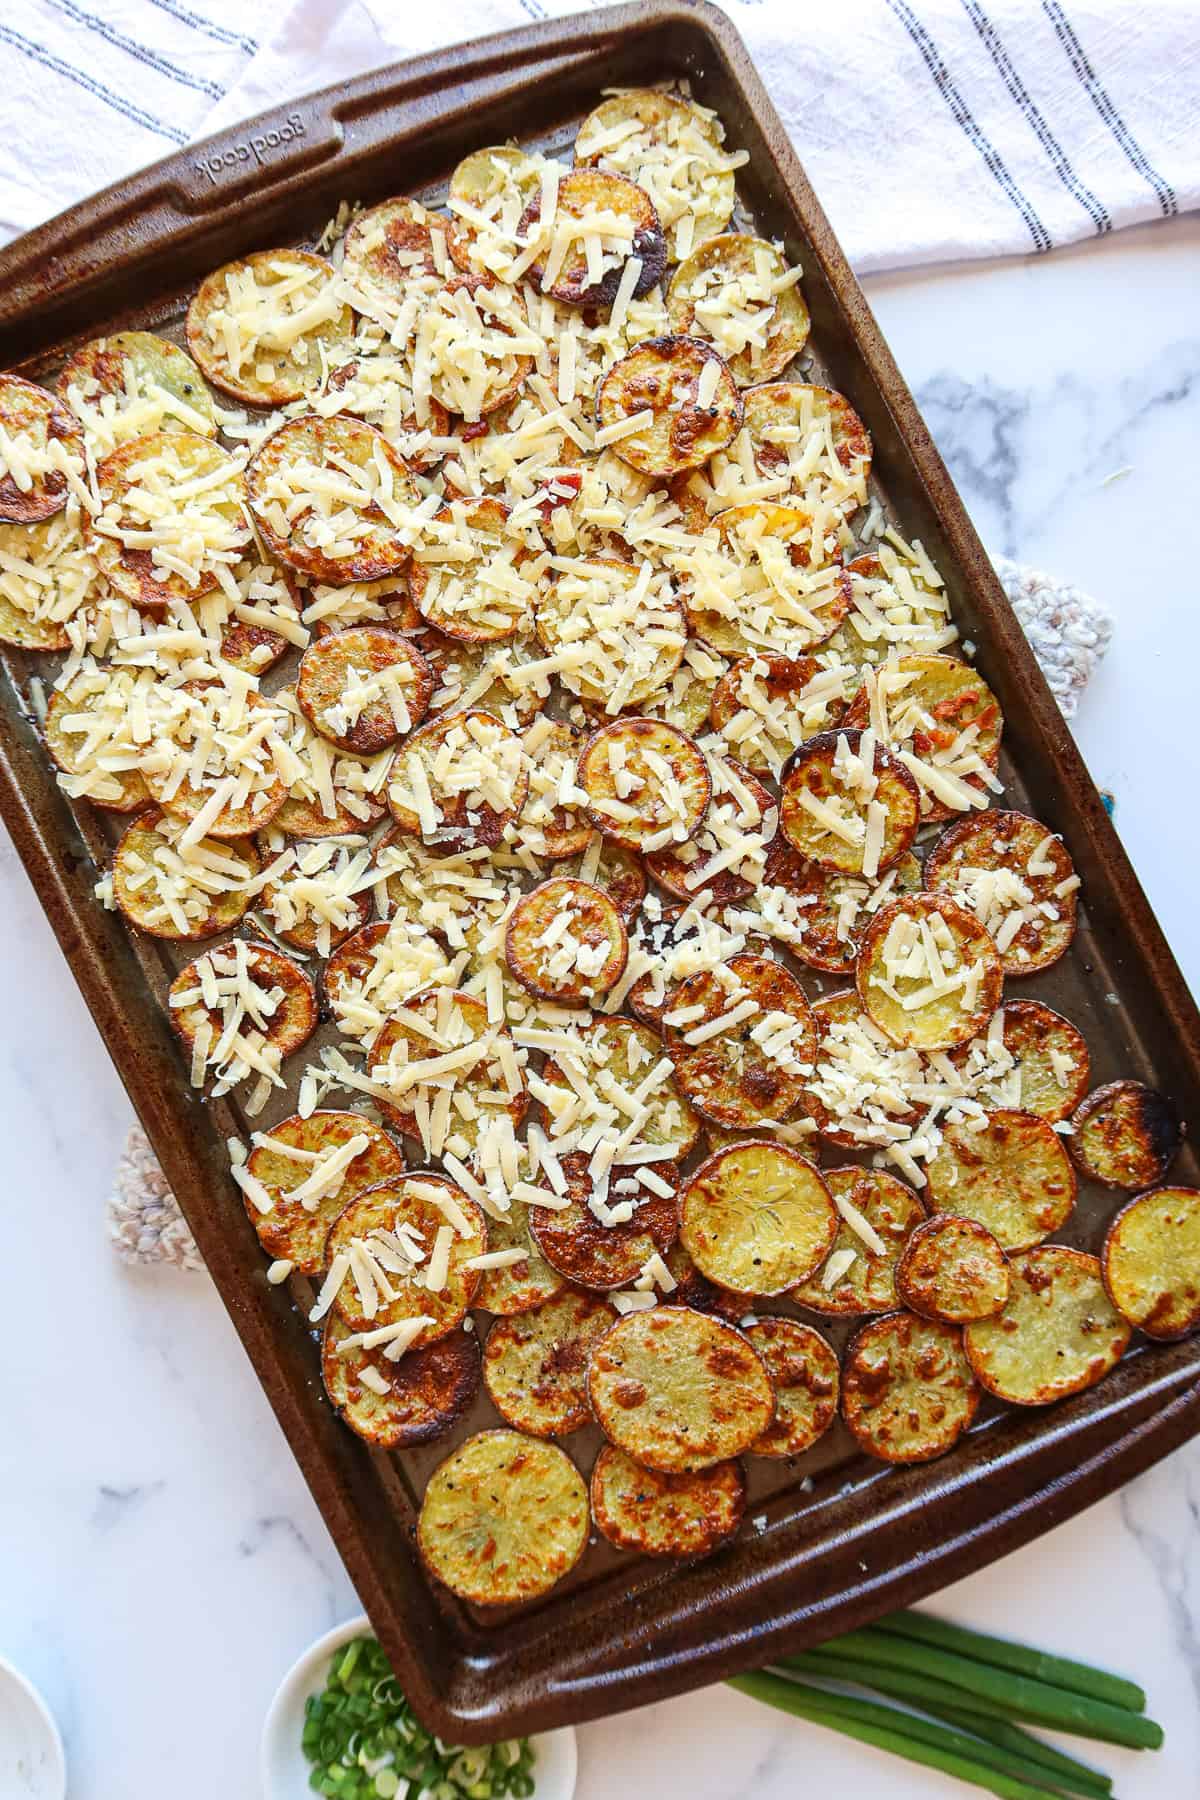 Adding shredded cheese to homemade potato chips atop a baking sheet.